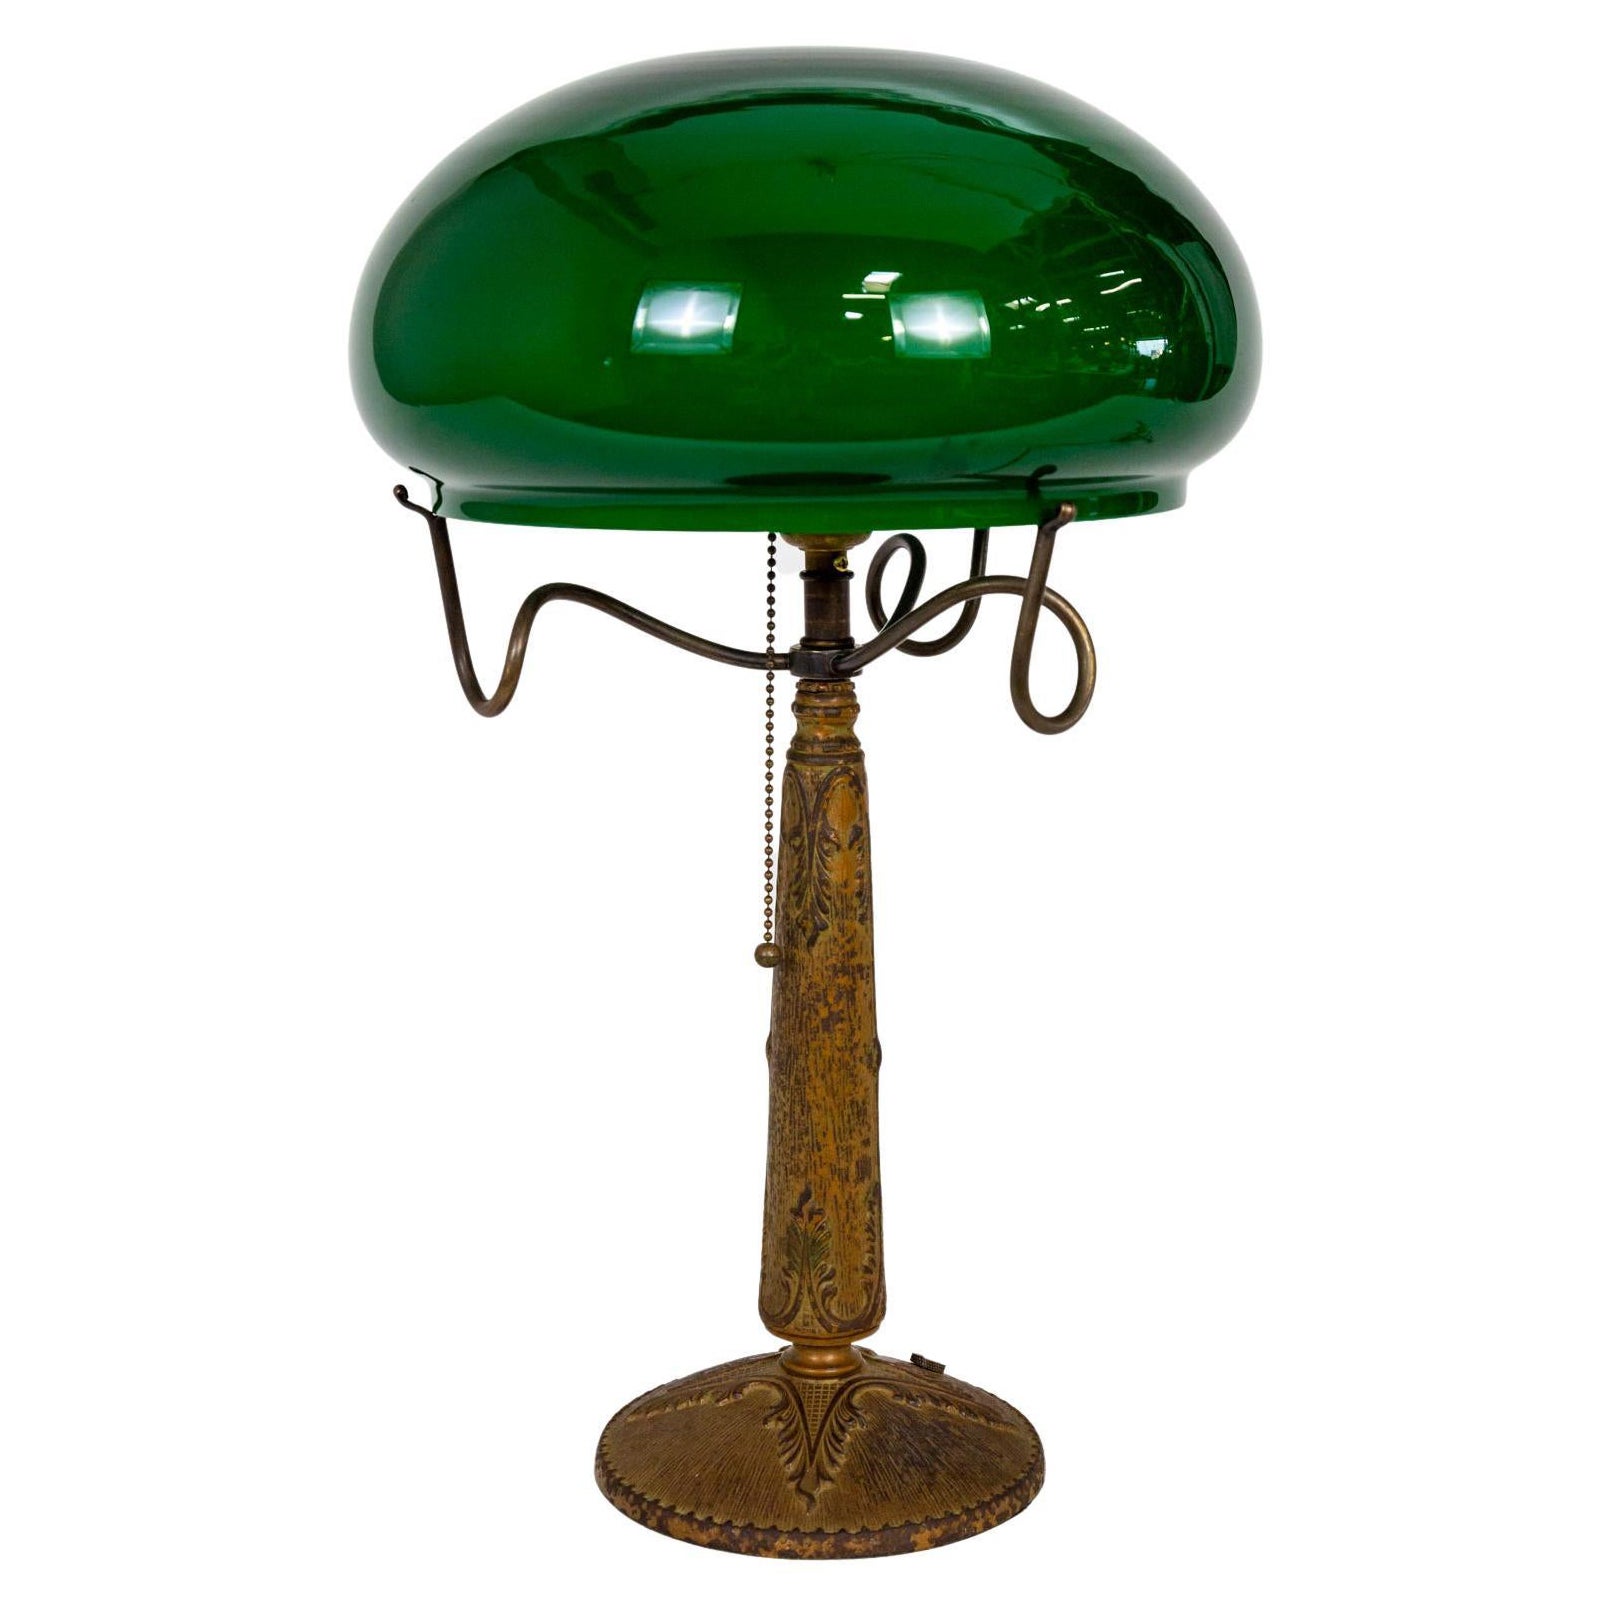 Textured Cast Metal Nouveau Lamp w/ Green Glass Shade & Curled Shade Holder For Sale